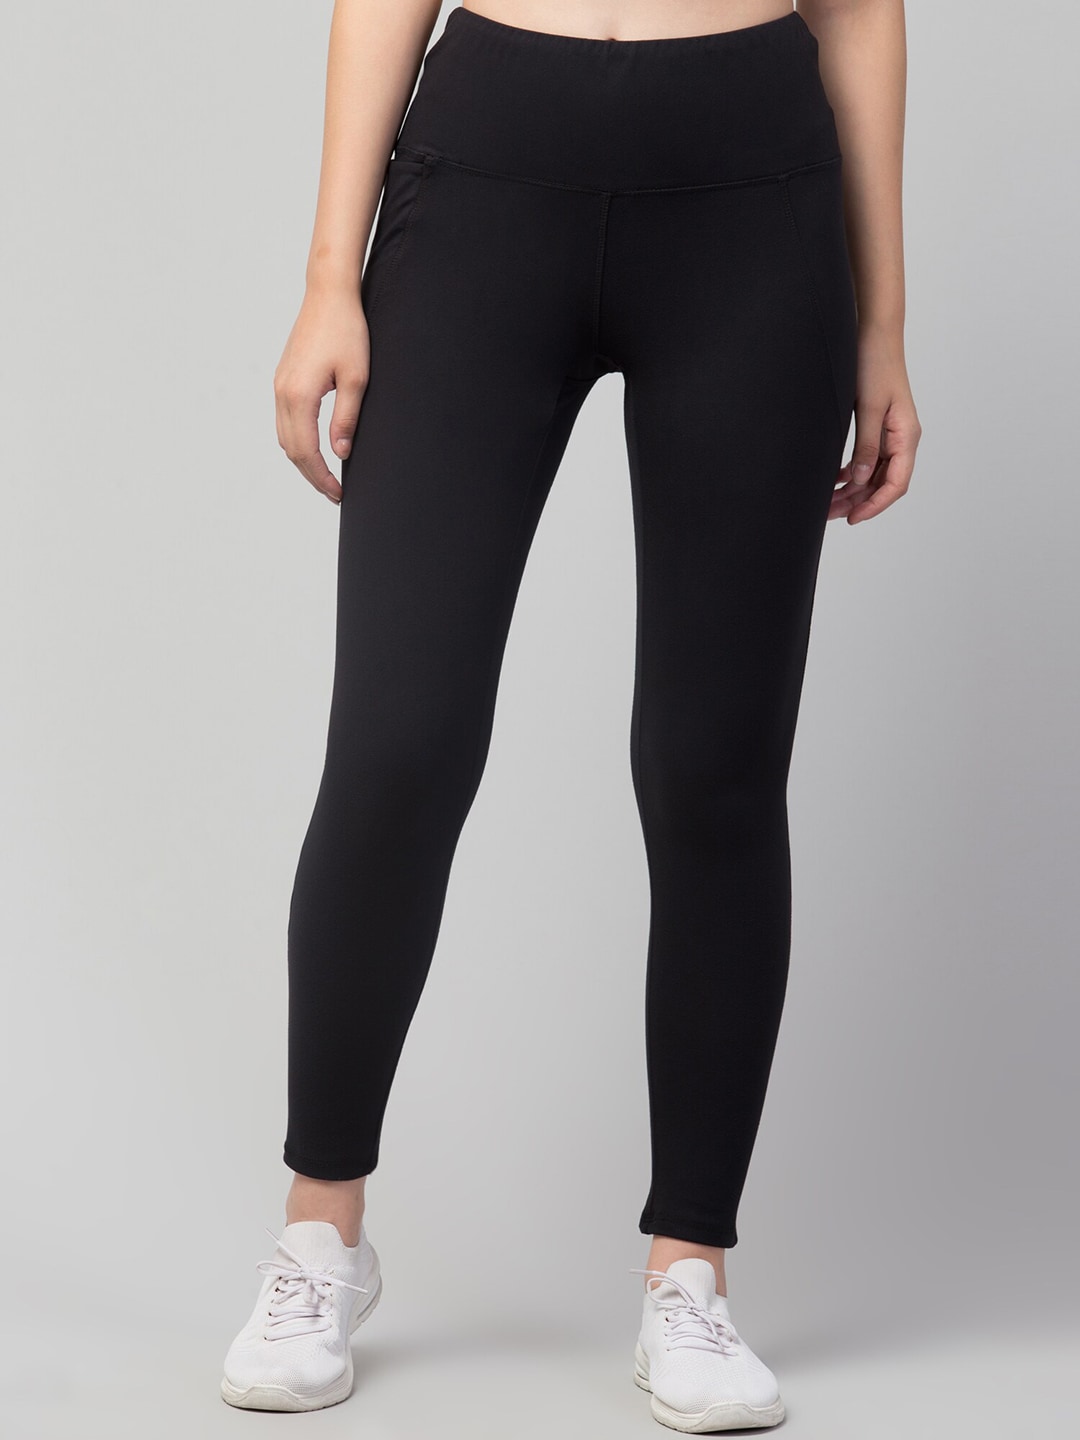 Apraa & Parma Women Black Solid Dry-Fit Running Tights Price in India